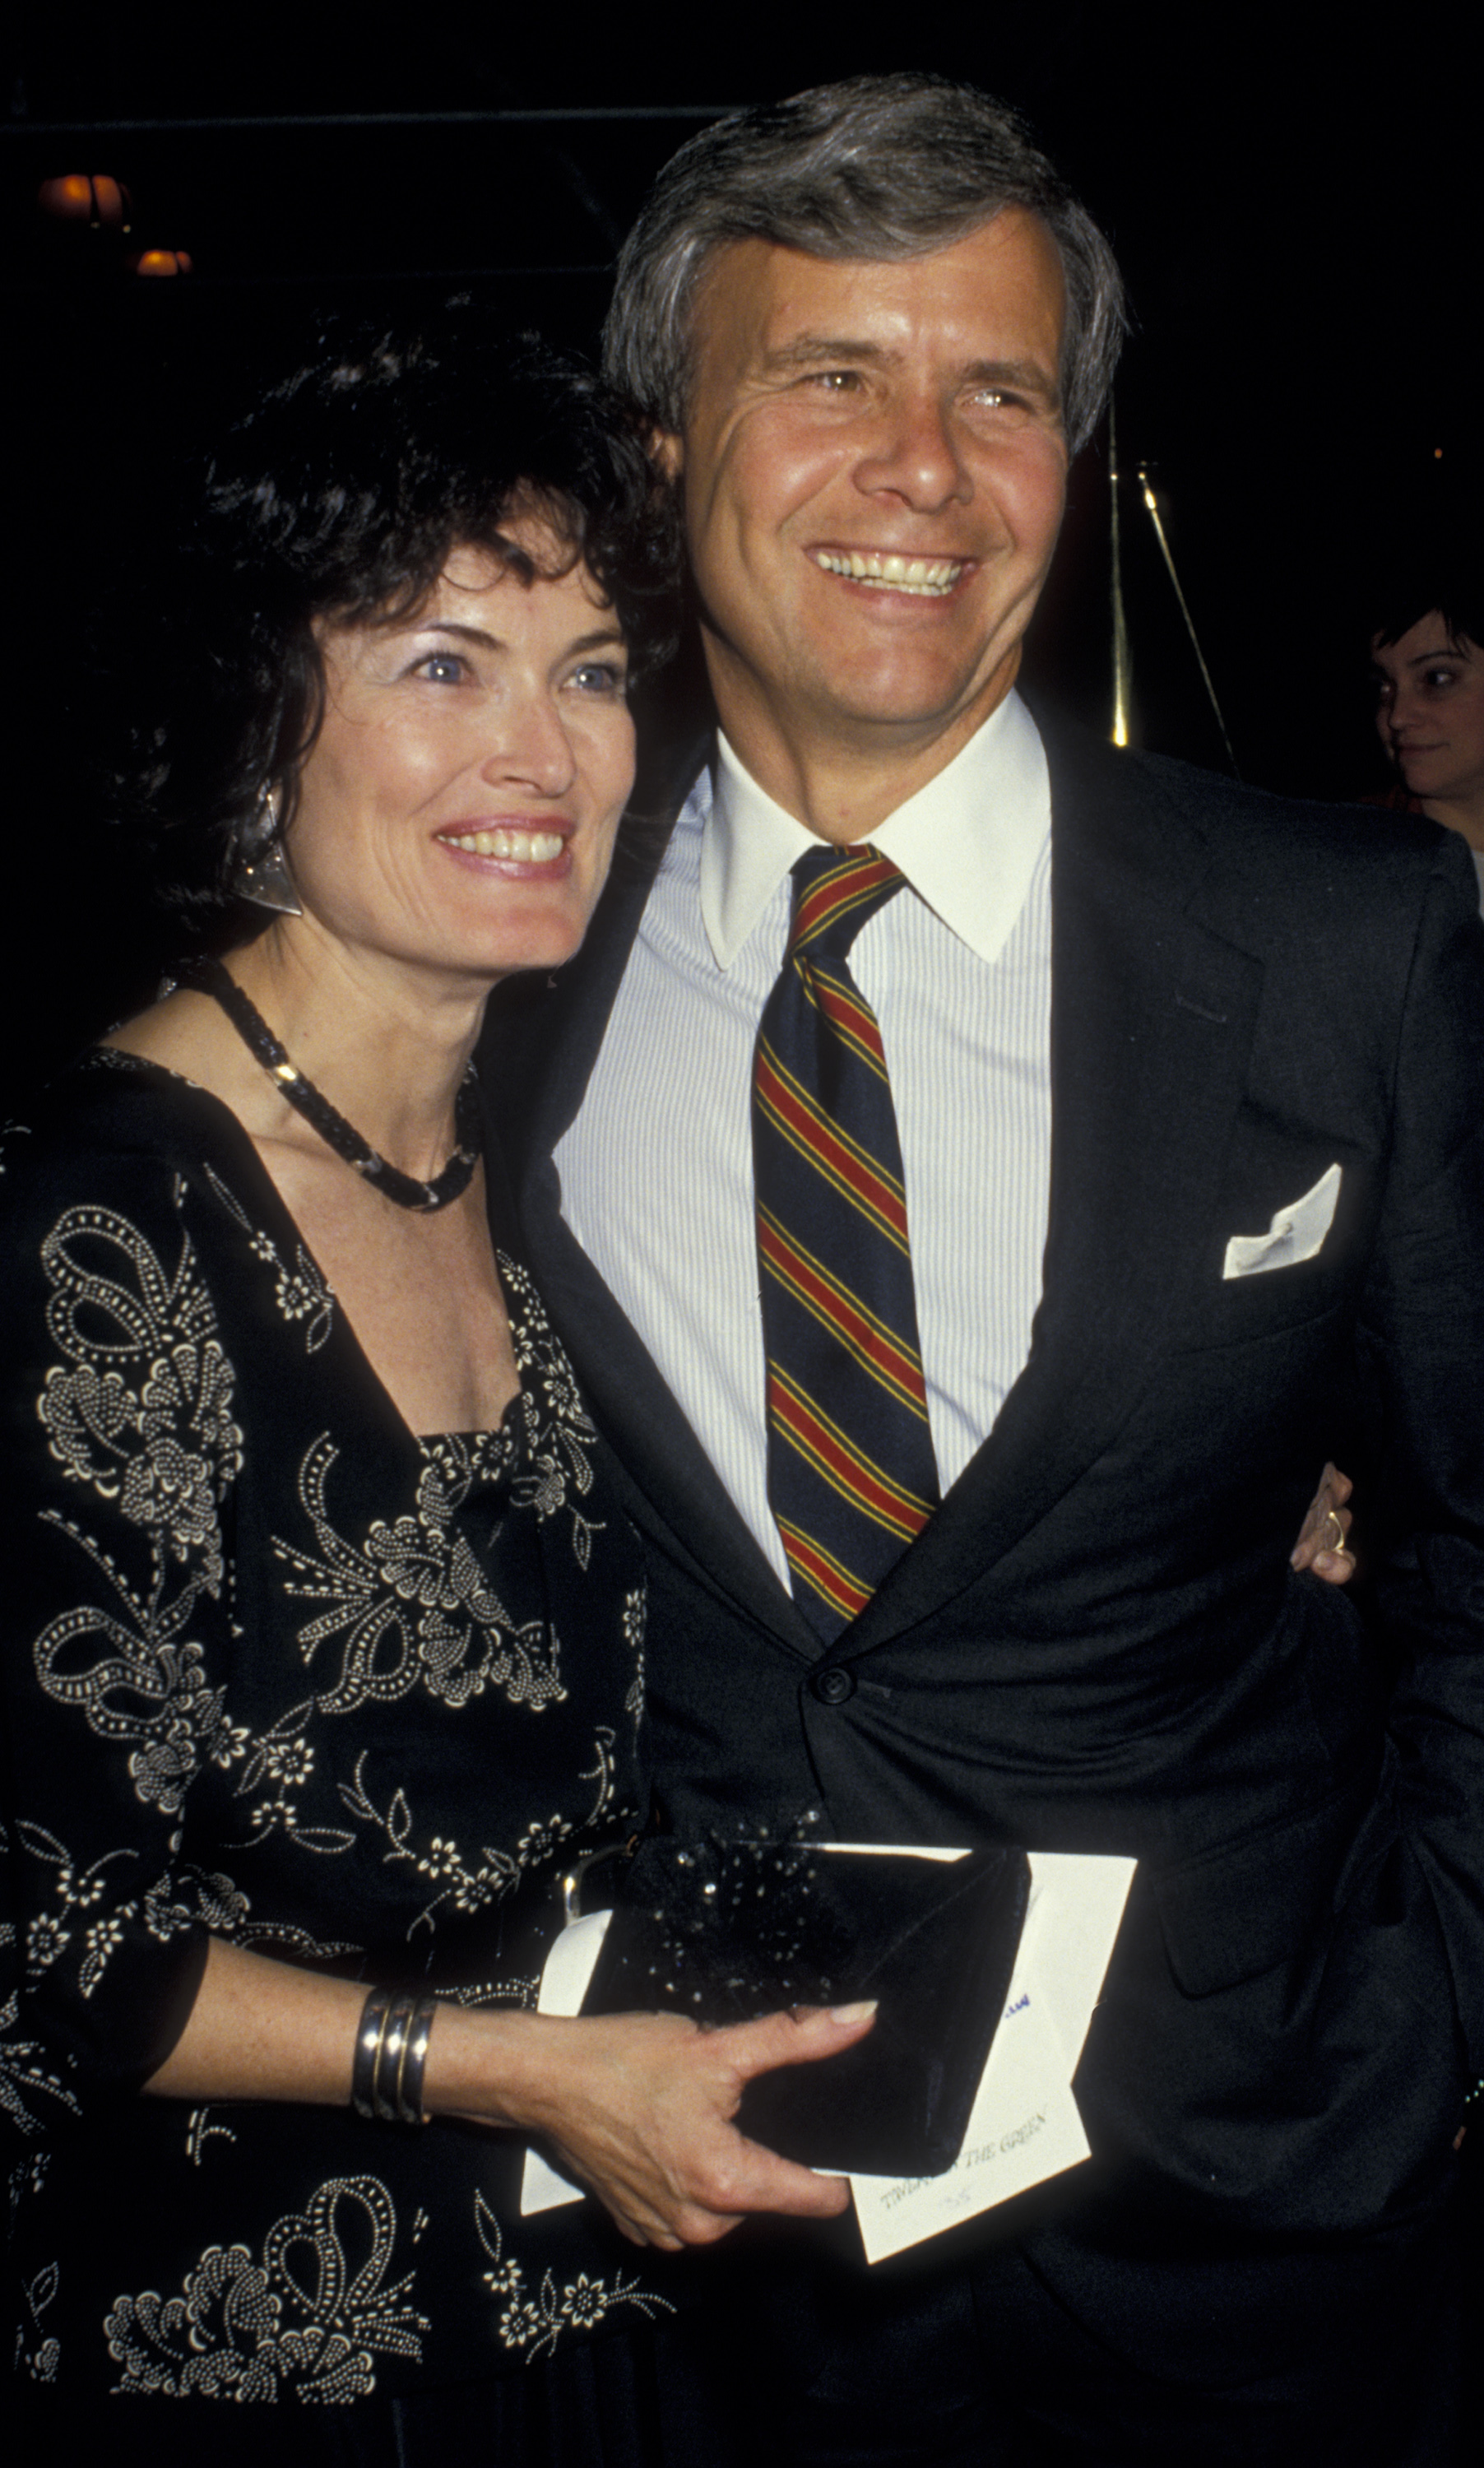 Meredith Auld and Tom Brokaw at "Who Owns News Debate" on May 6, 1987, in New York City | Source: Getty Images